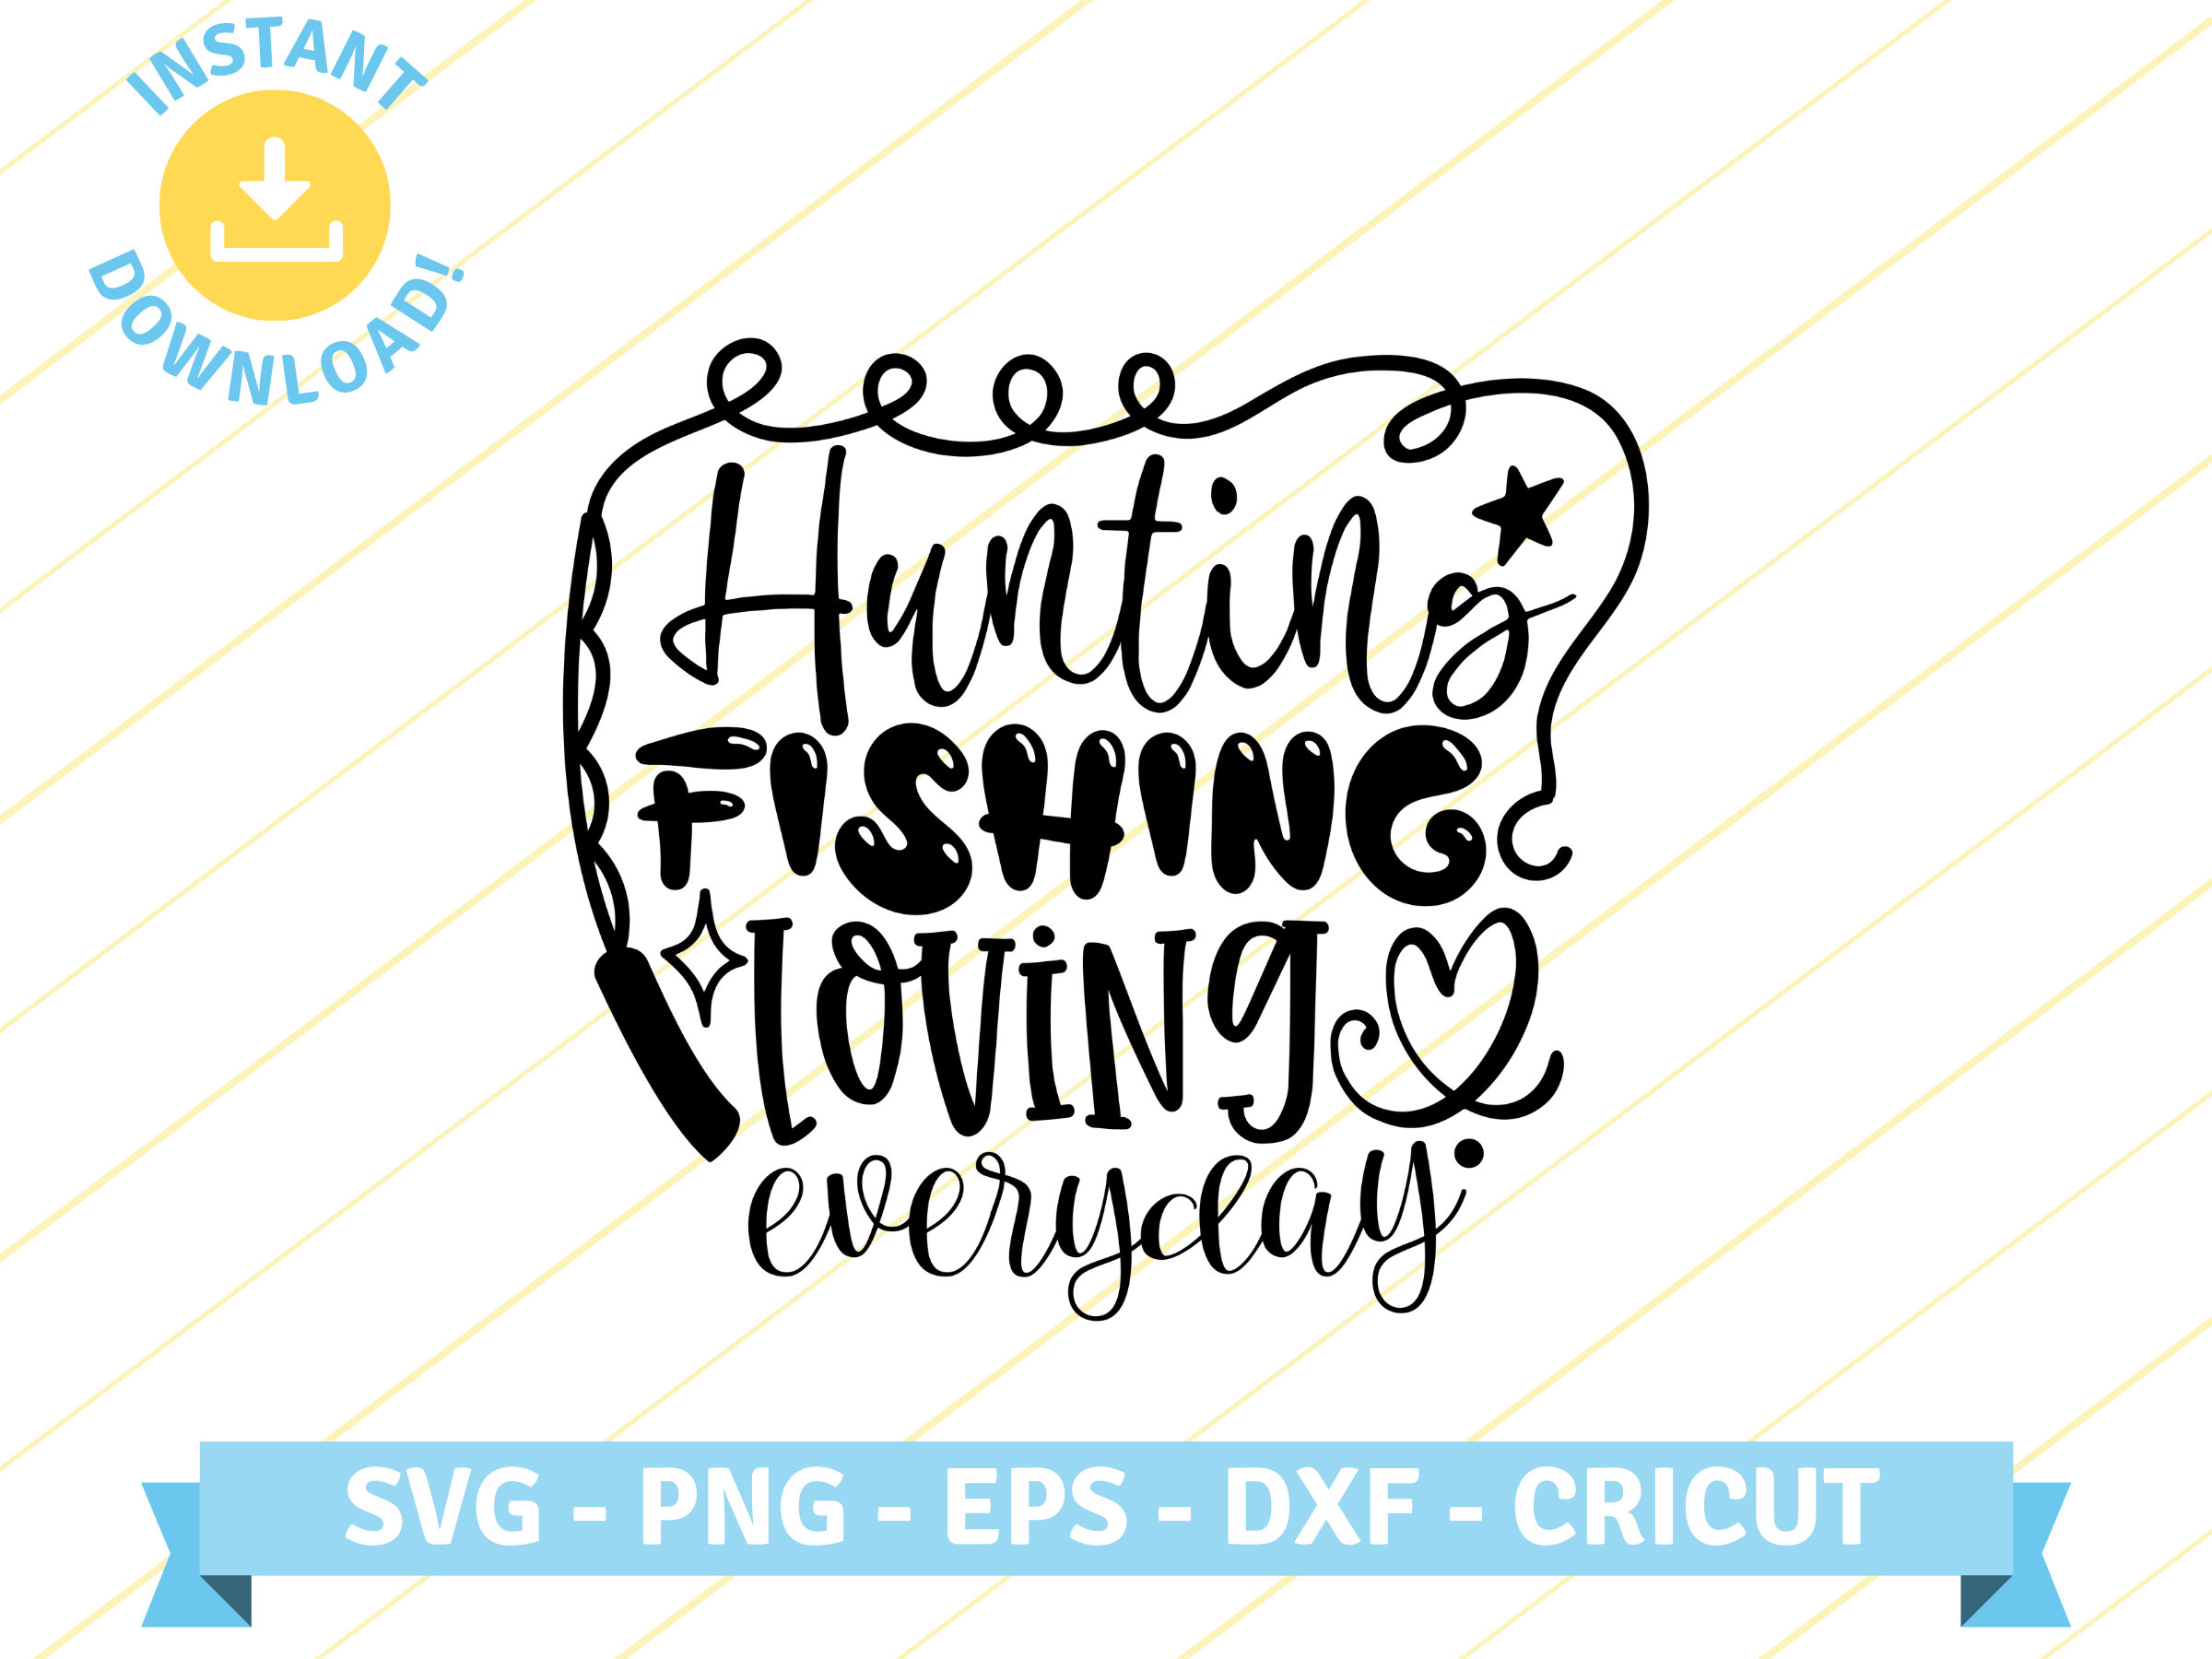 Hunting Fishing Loving Everyday | country song lyrics quote | SVG PNG EPS  Cut files for Cricut, Silhouette, T Shirt, Sticker Design